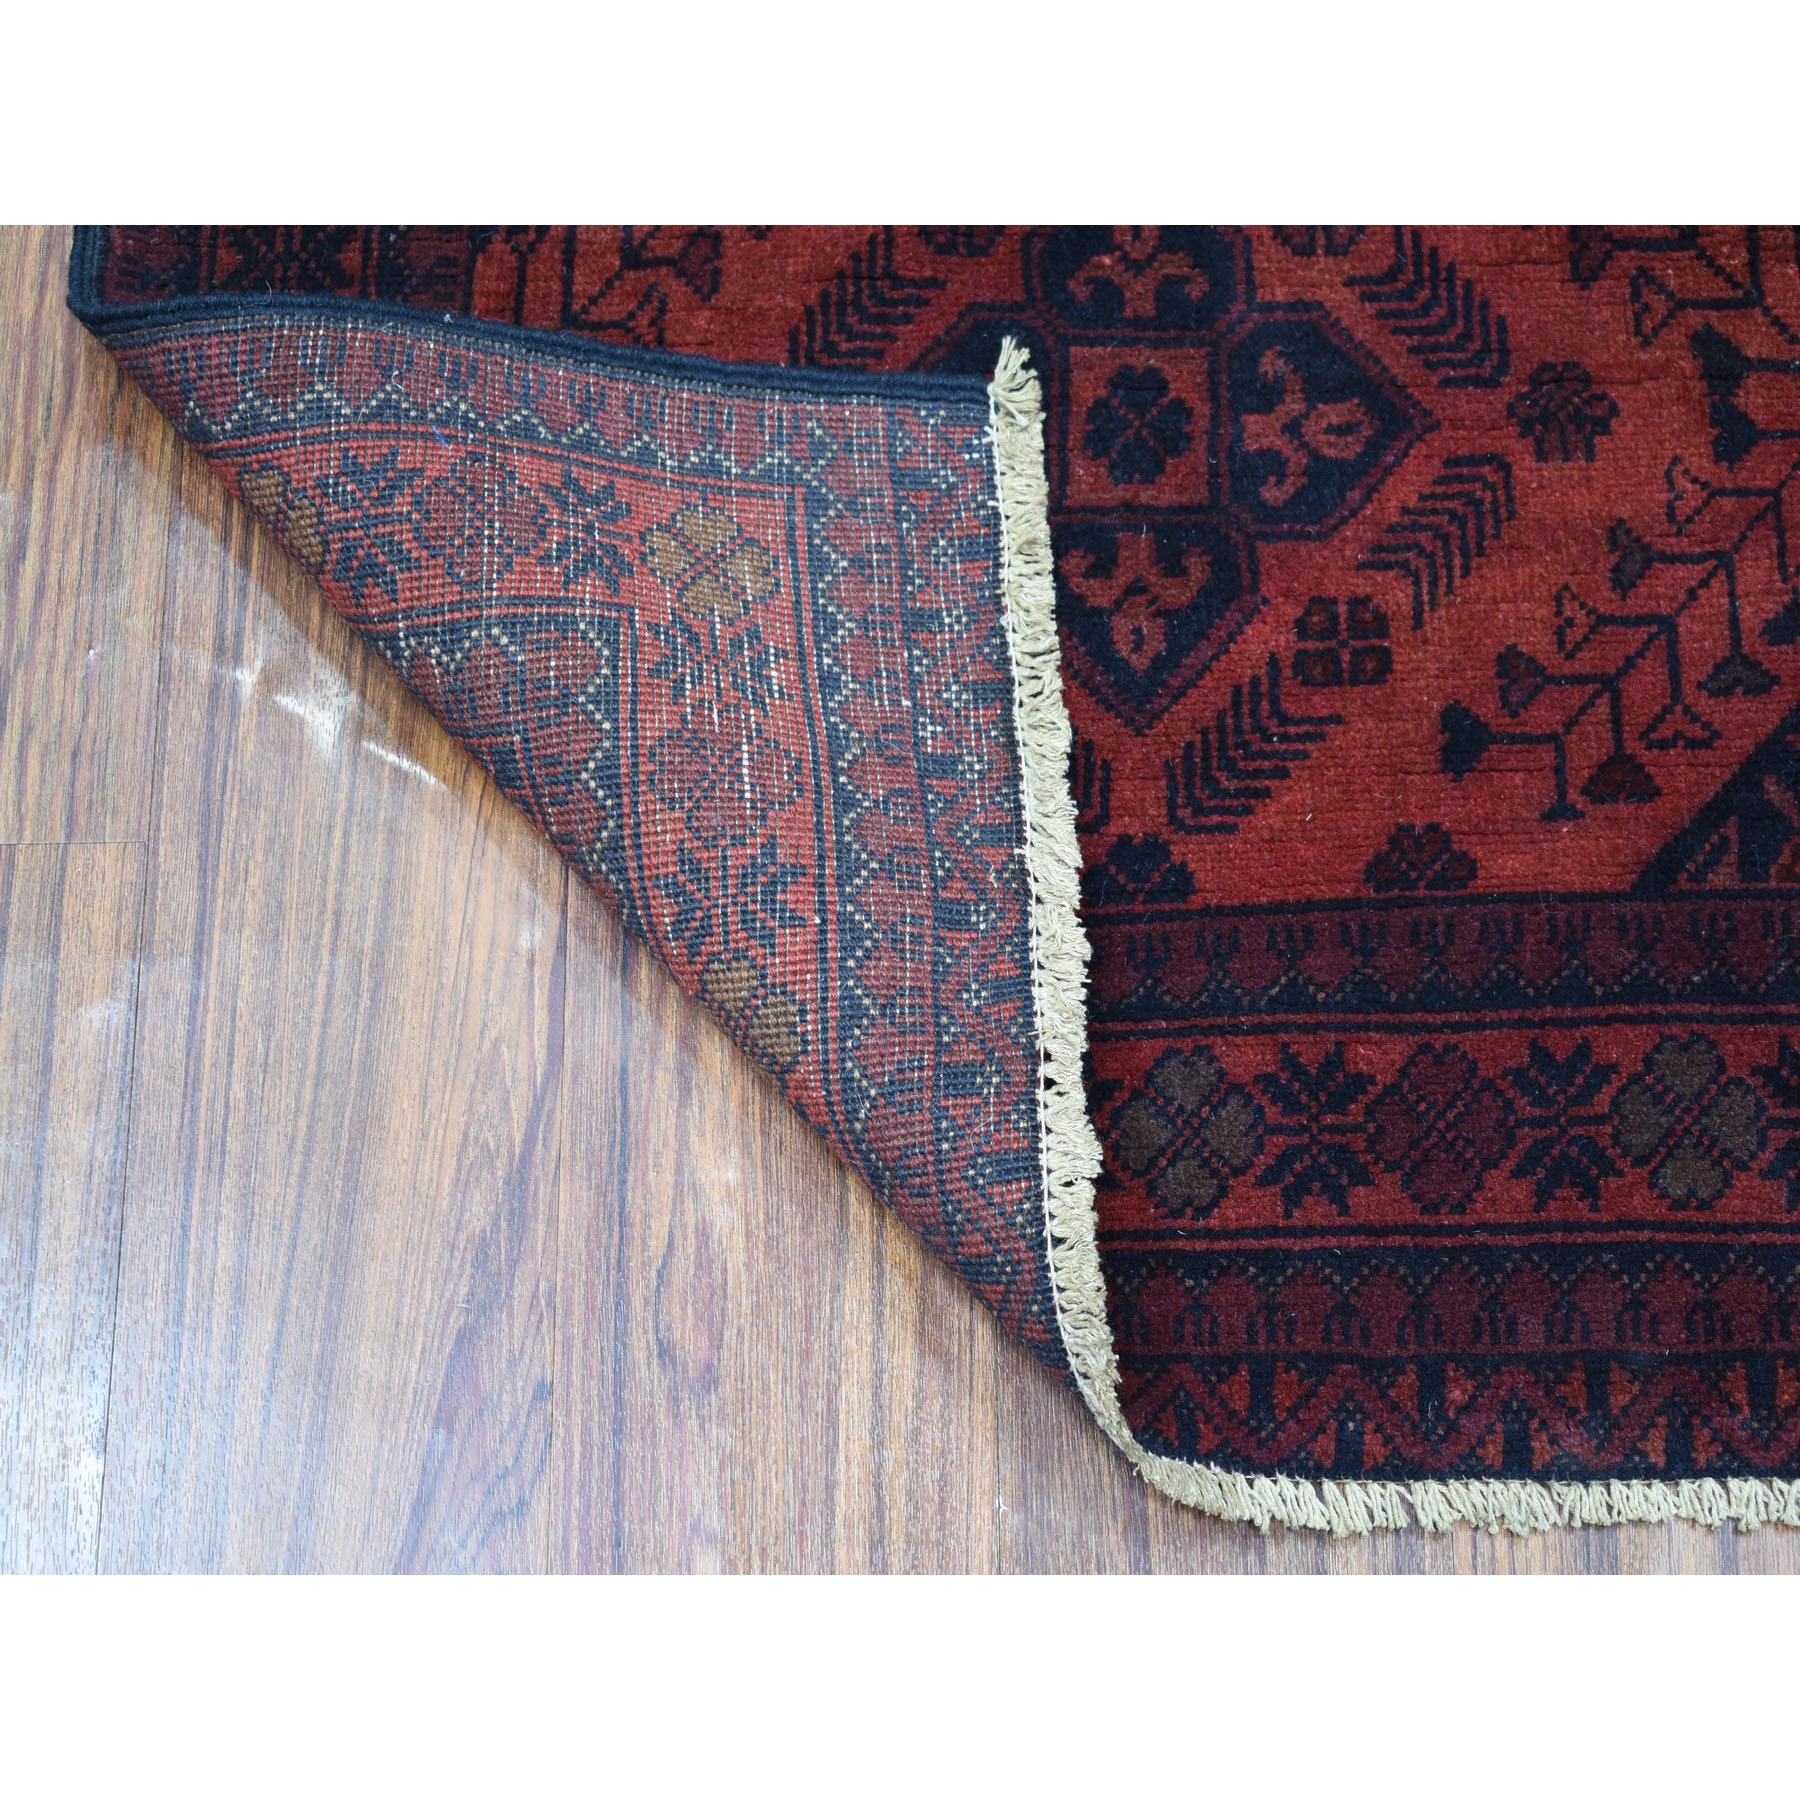 2-7 x6-1  Deep and Saturated Red Geometric Afghan Andkhoy Runner Pure Wool Hand Knotted Oriental Rug 